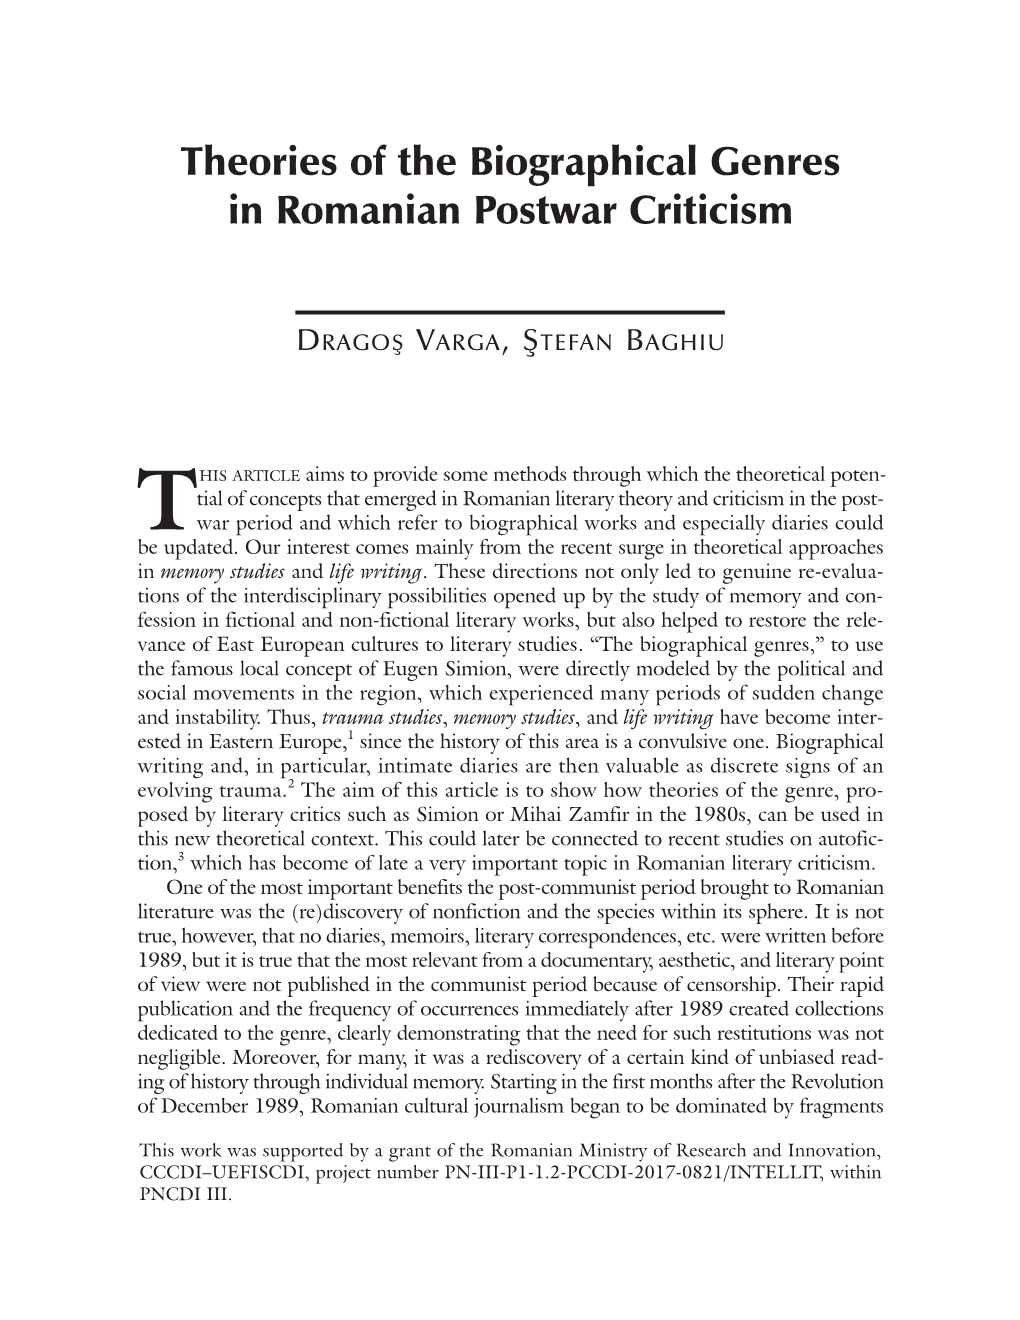 Theories of the Biographical Genres in Romanian Postwar Criticism